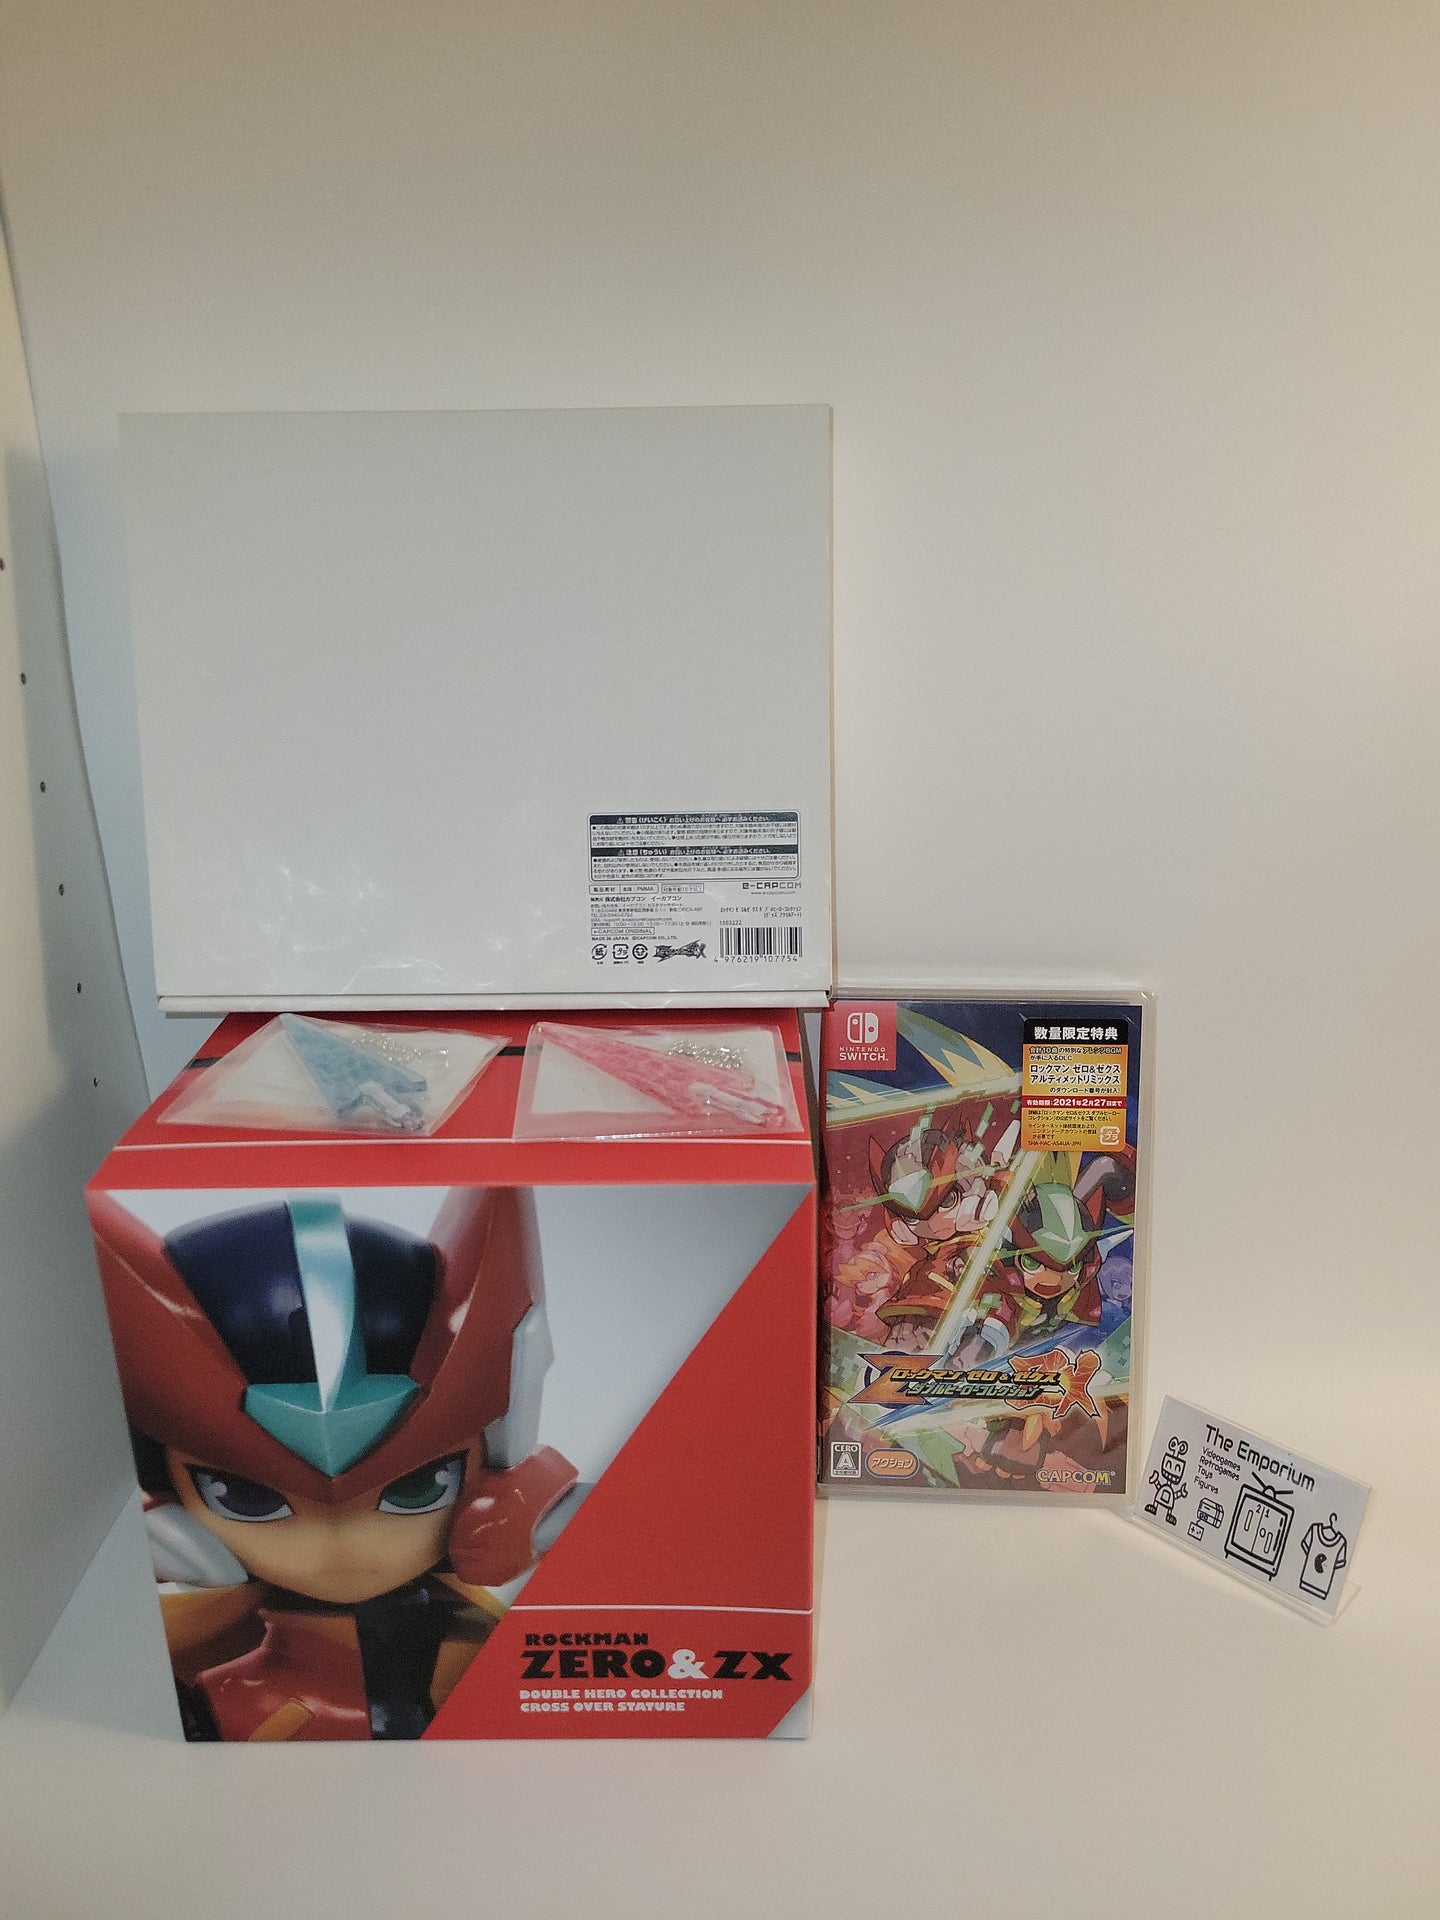 RockMan ZERO/ZX LEGACY COLLECTION E-Capcom LIMITED EDITION (With 